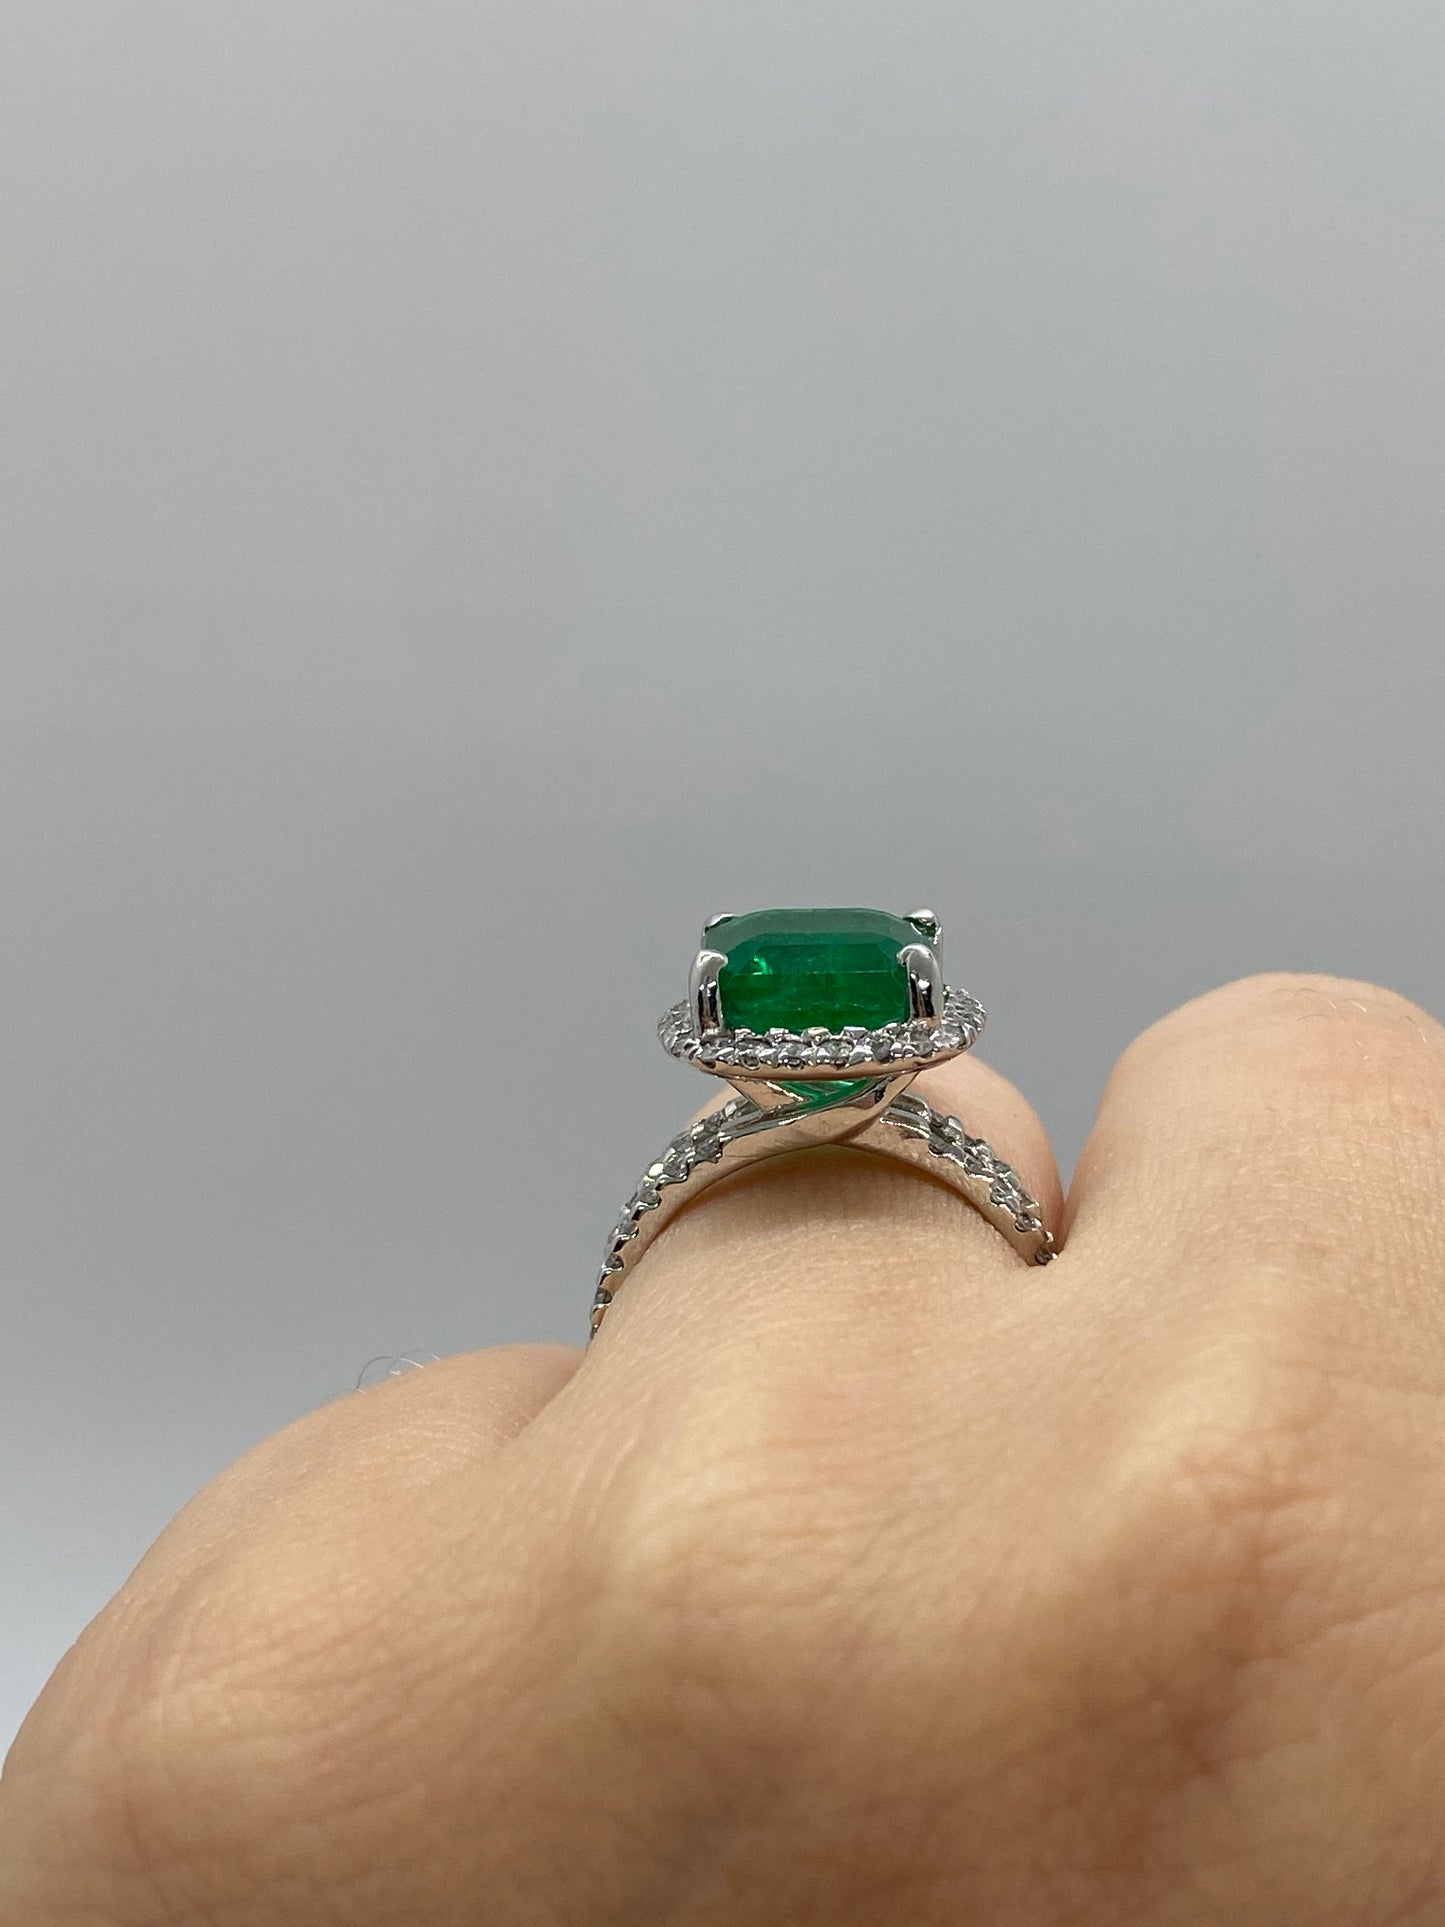 Emerald Ring R17310 - Royal Gems and Jewelry